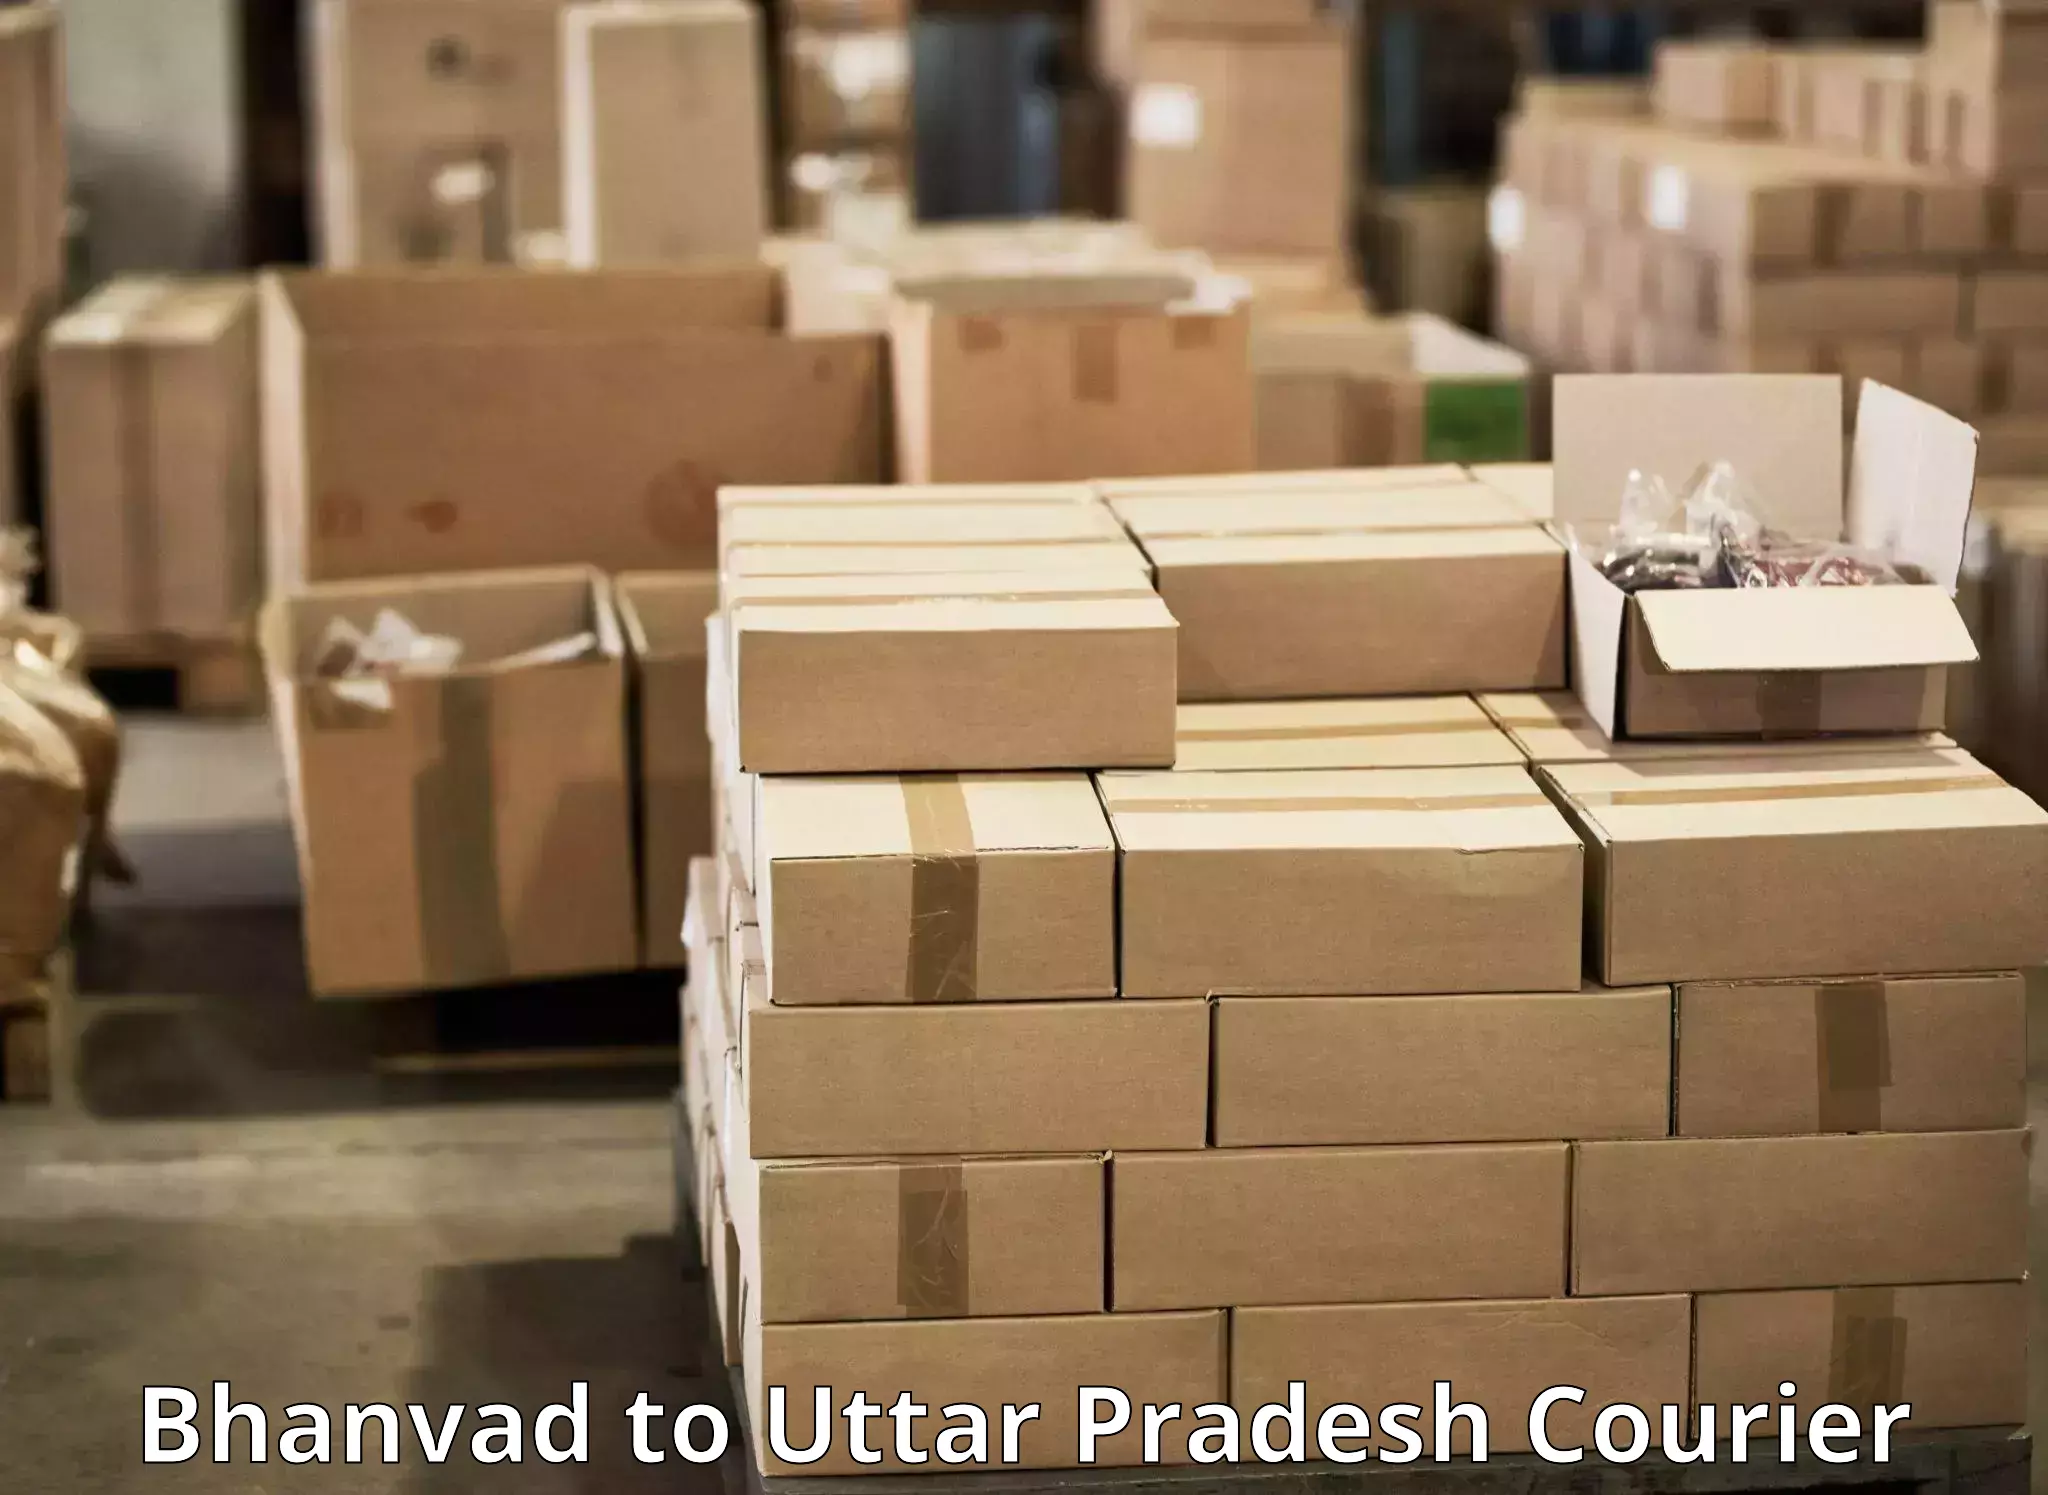 Overnight delivery in Bhanvad to Noida